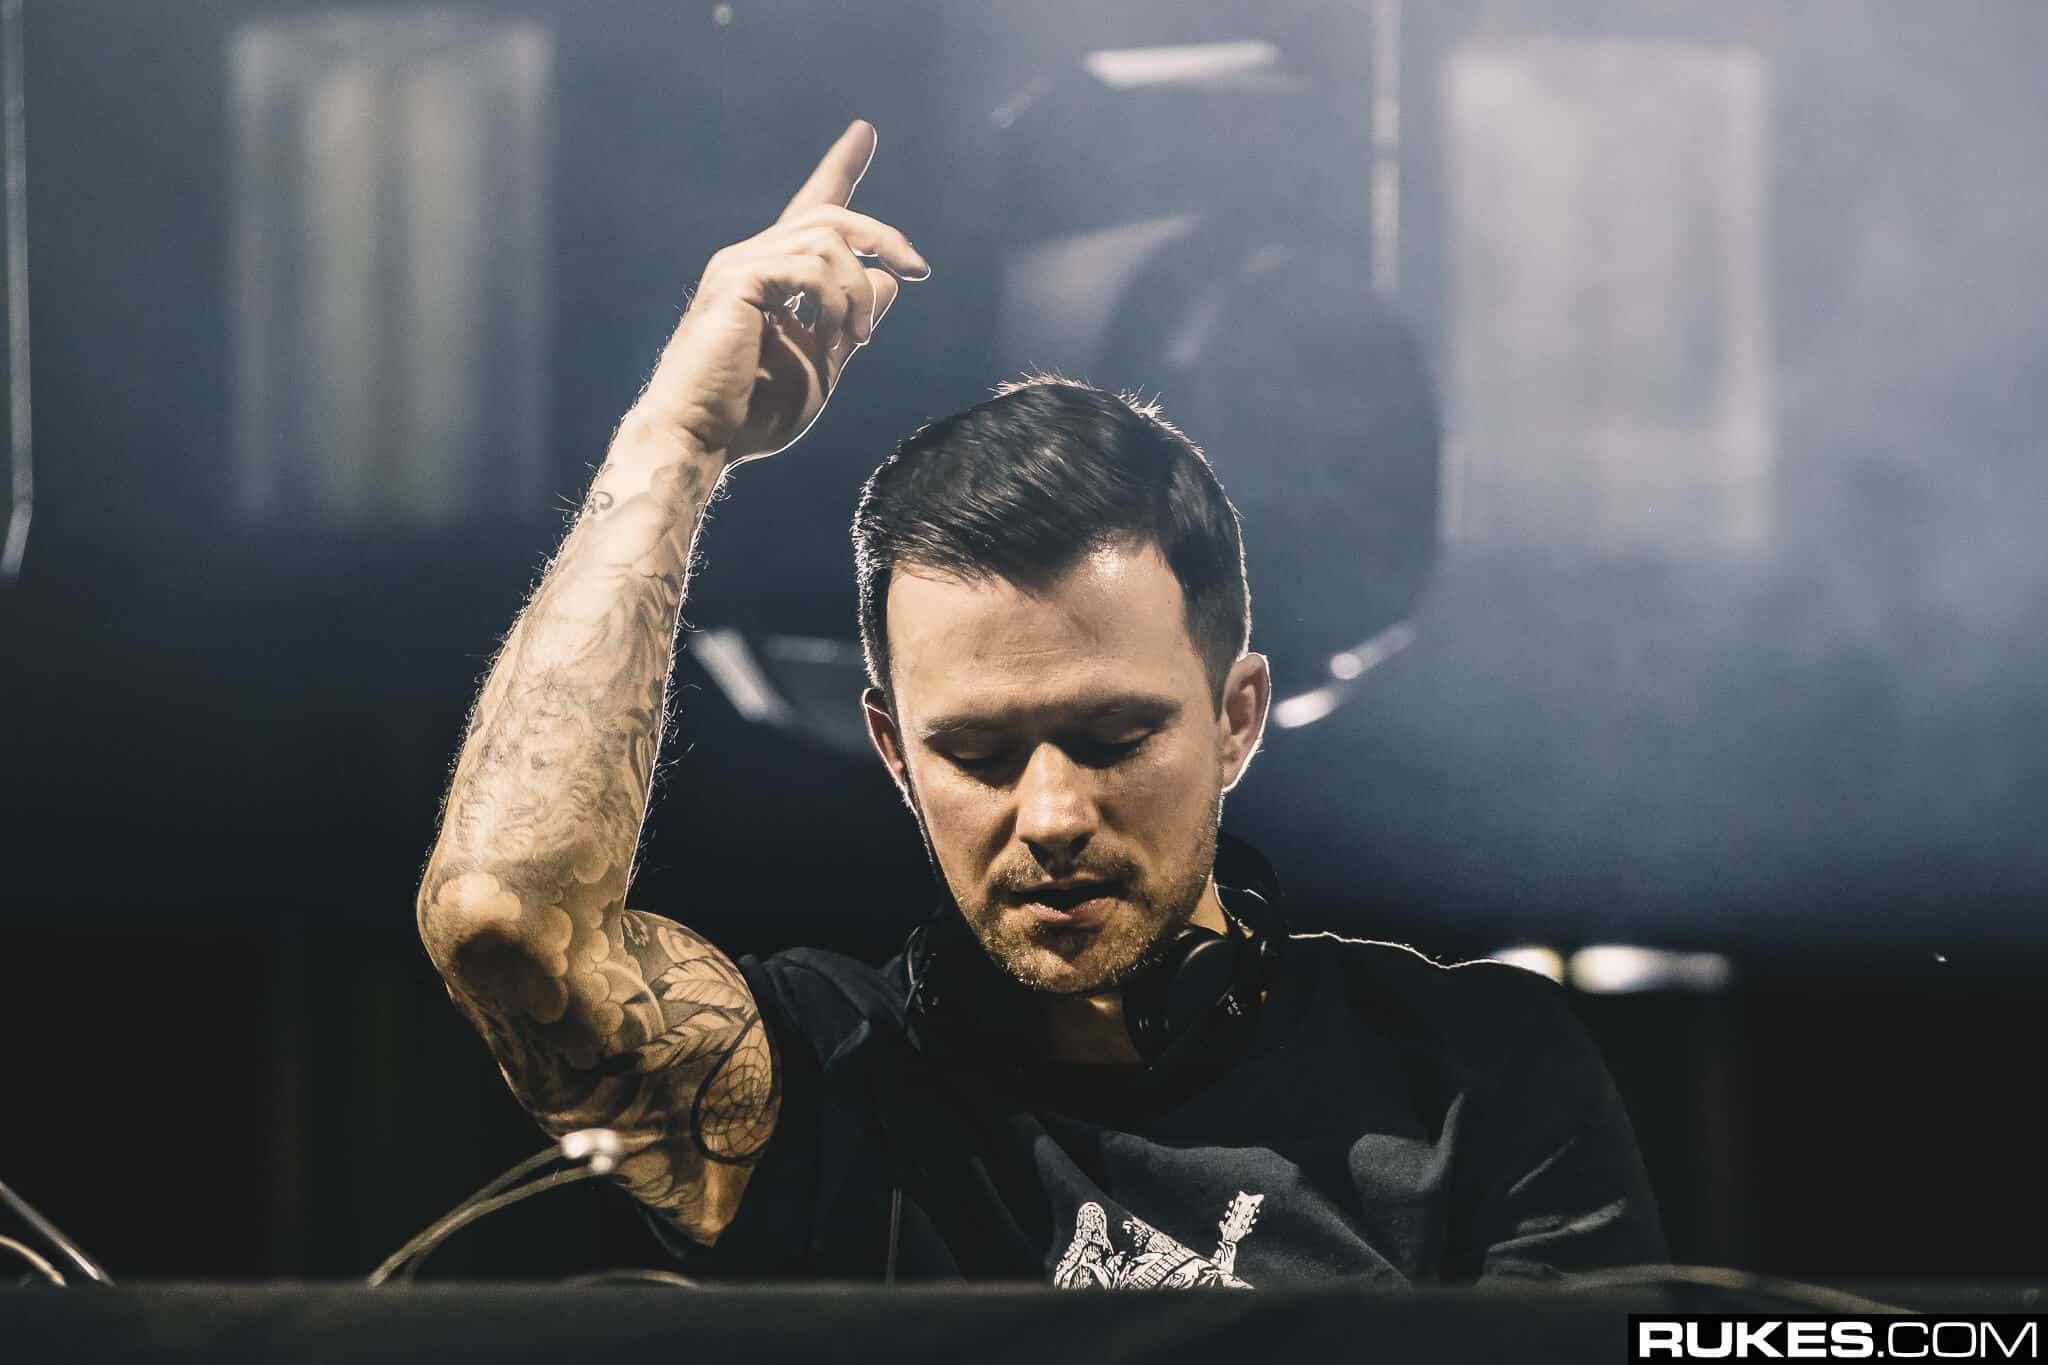 Dirty South & Julia Church deliver new single ‘Home In My Hand’: Listen